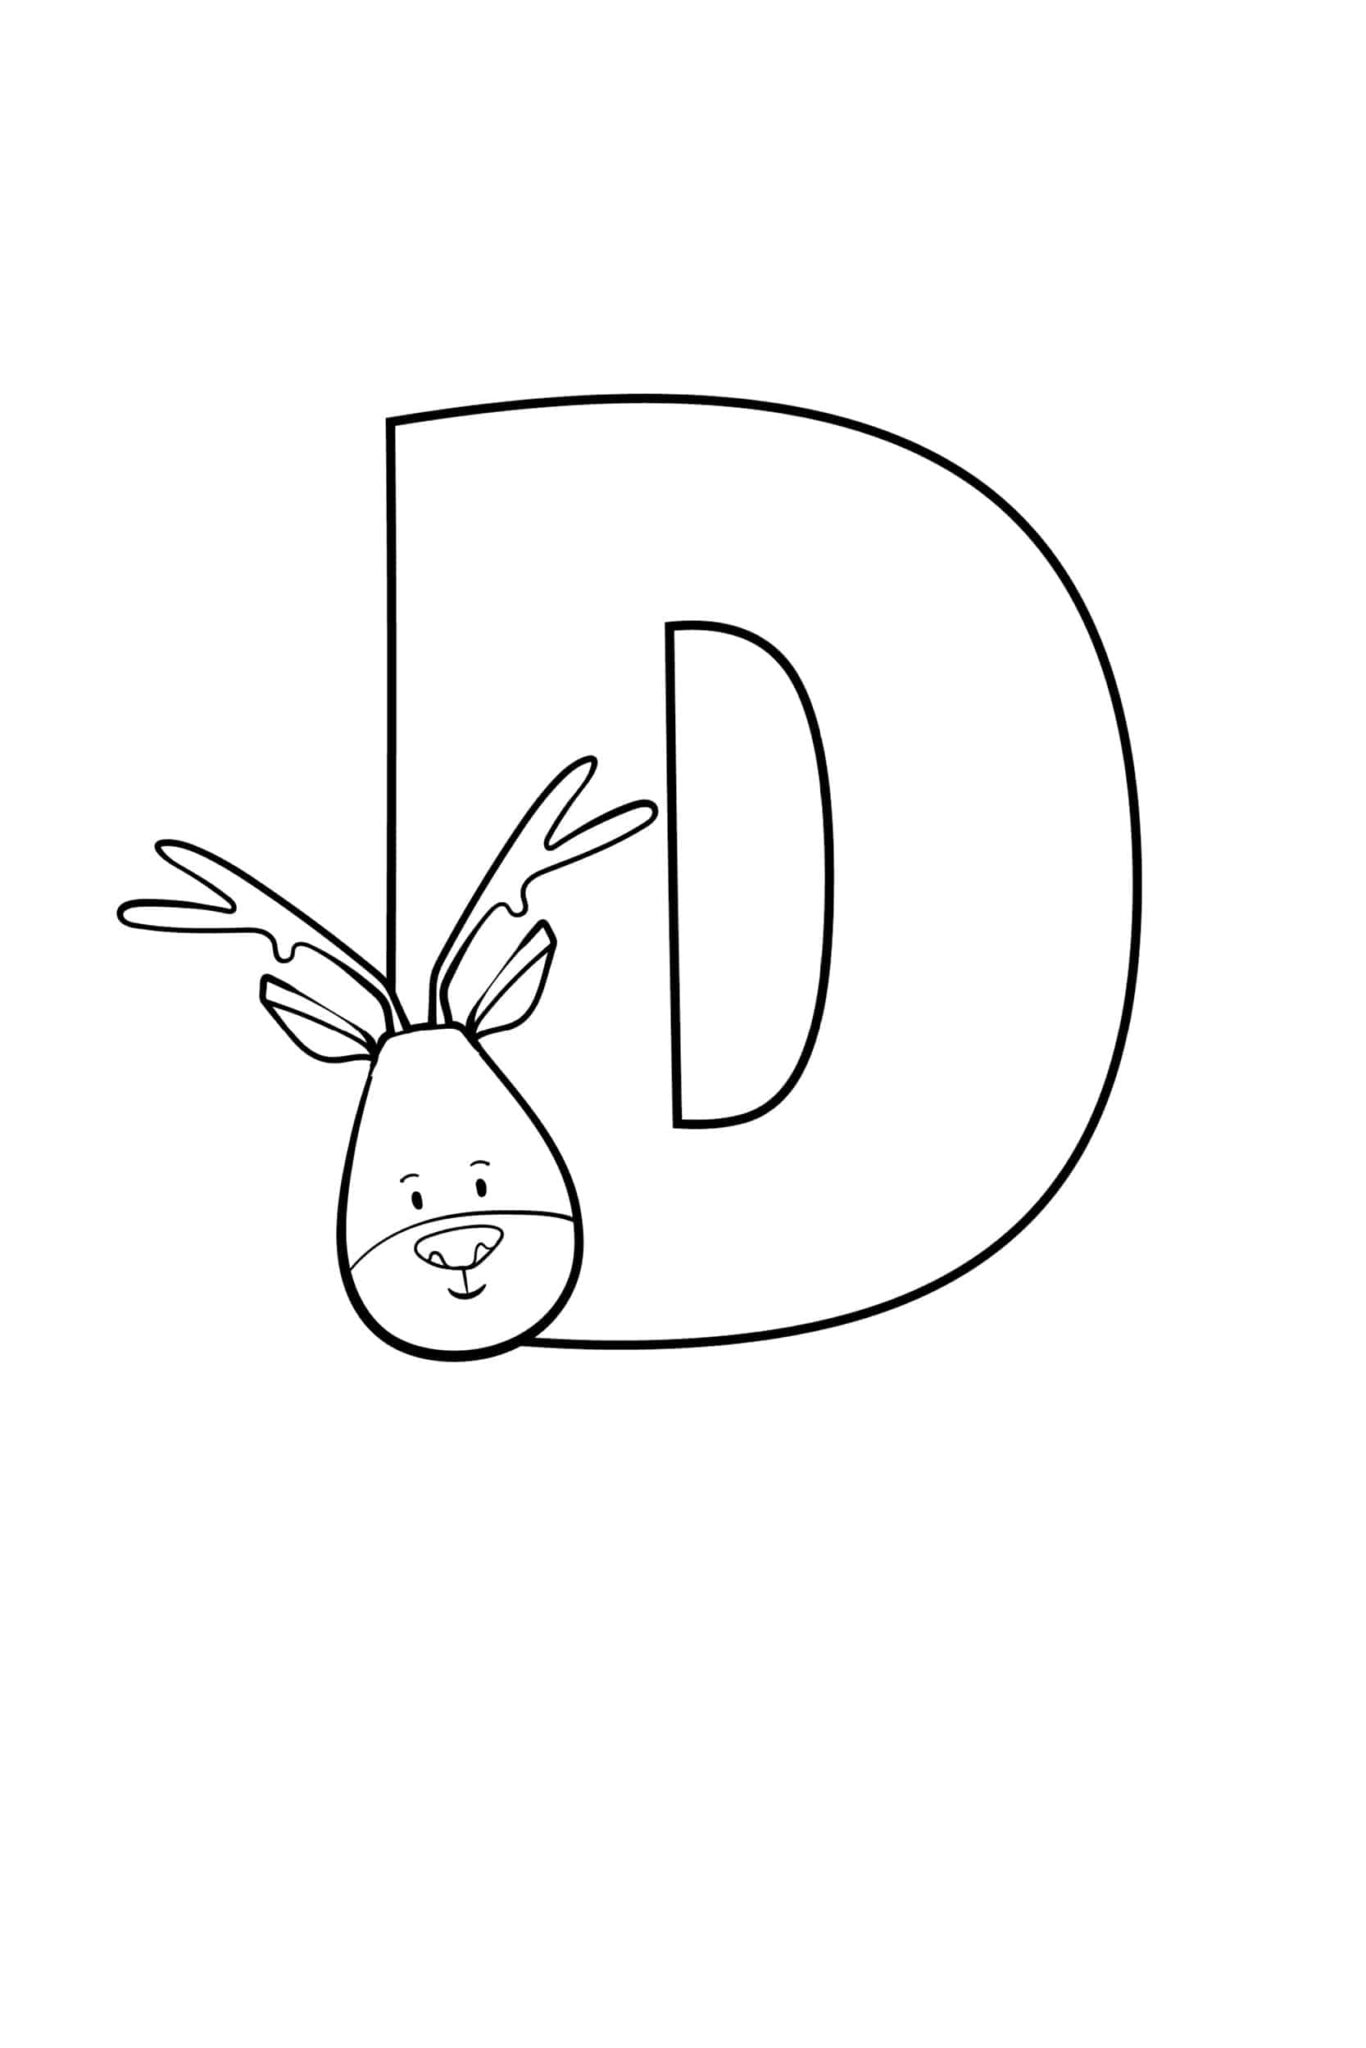 letter-d-coloring-pages-15-free-pages-printabulls